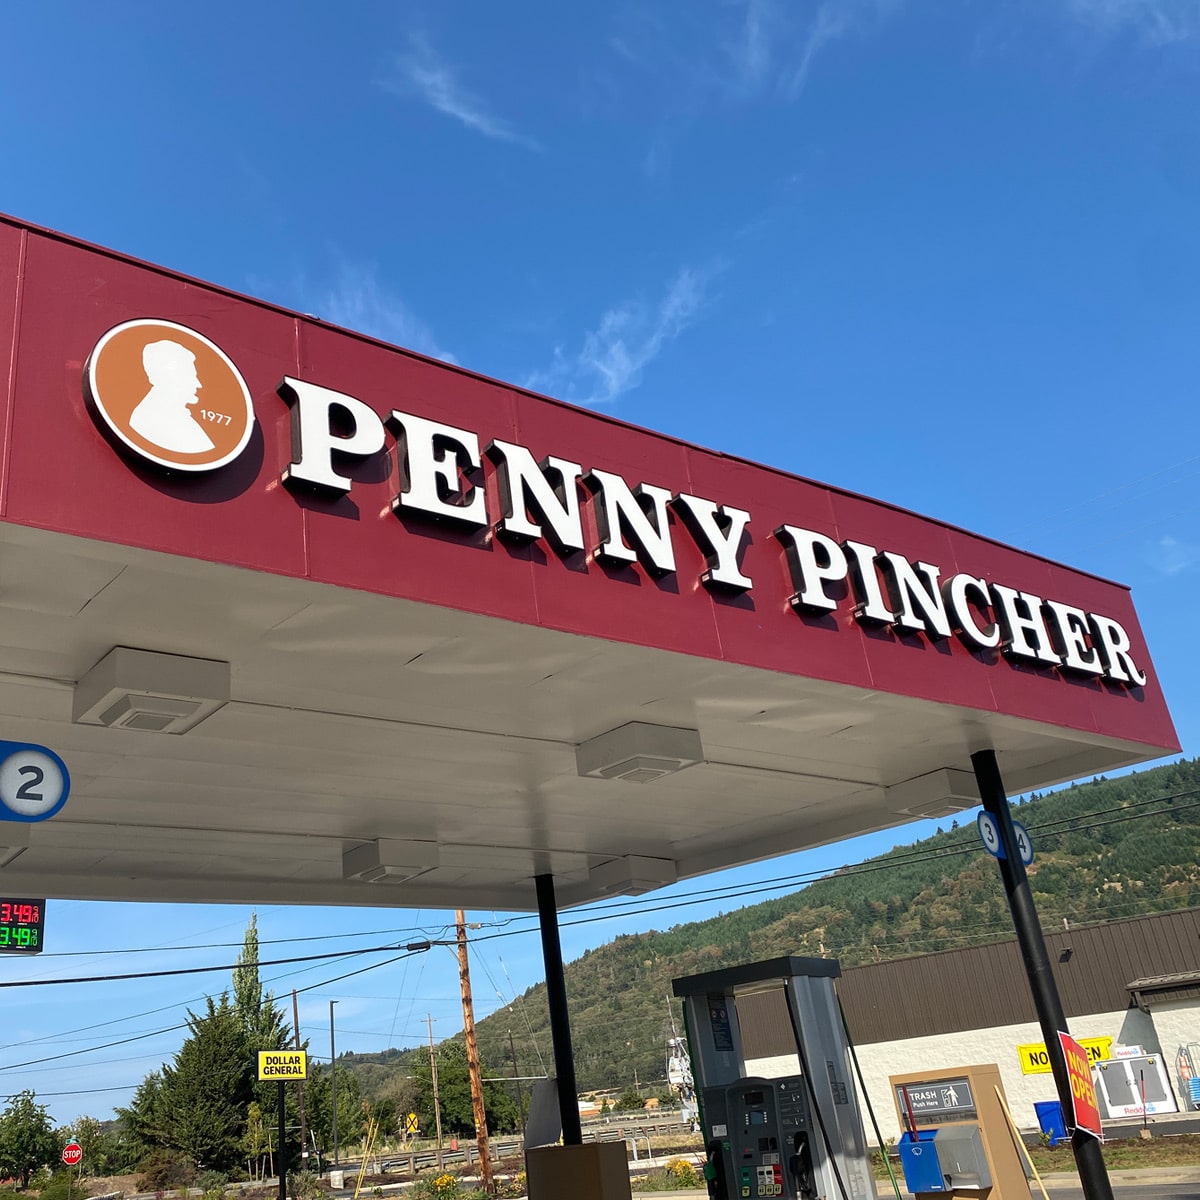 Shirtcliff Oil Company gas station awning in Riddle, Oregon called Penny Pincher.